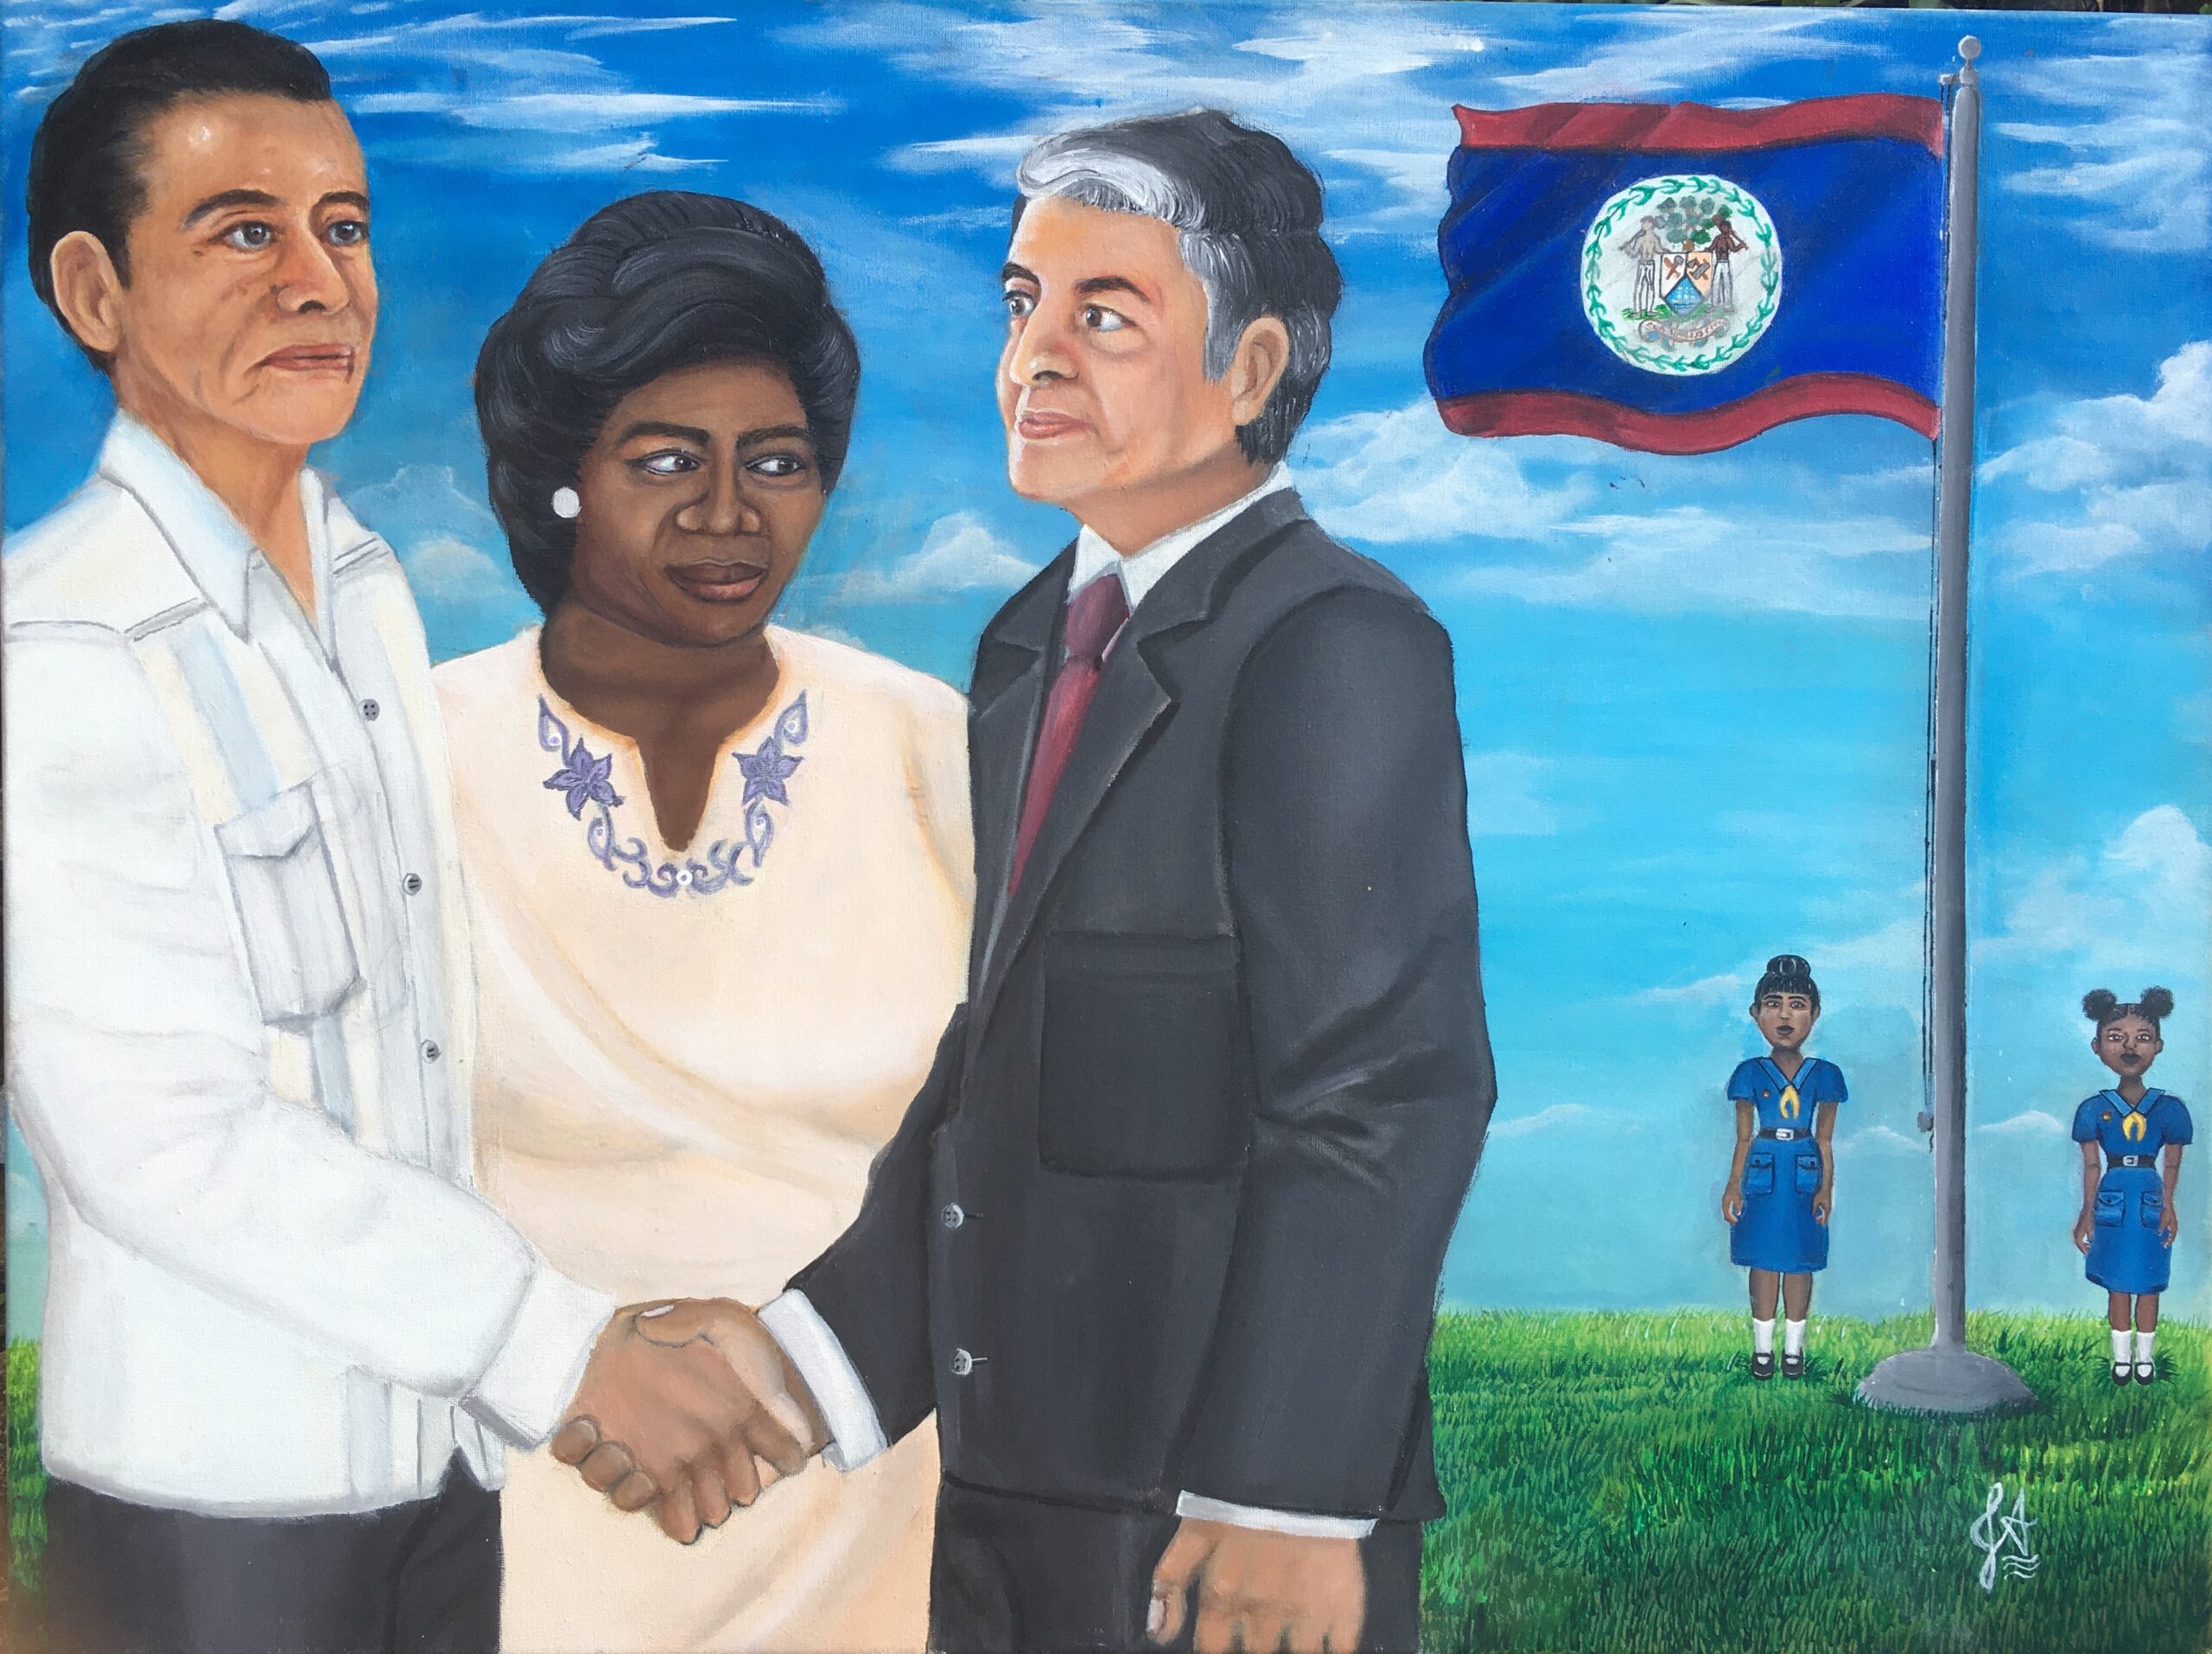 painting with the govenor general,leader of the opposition and Prime Minister